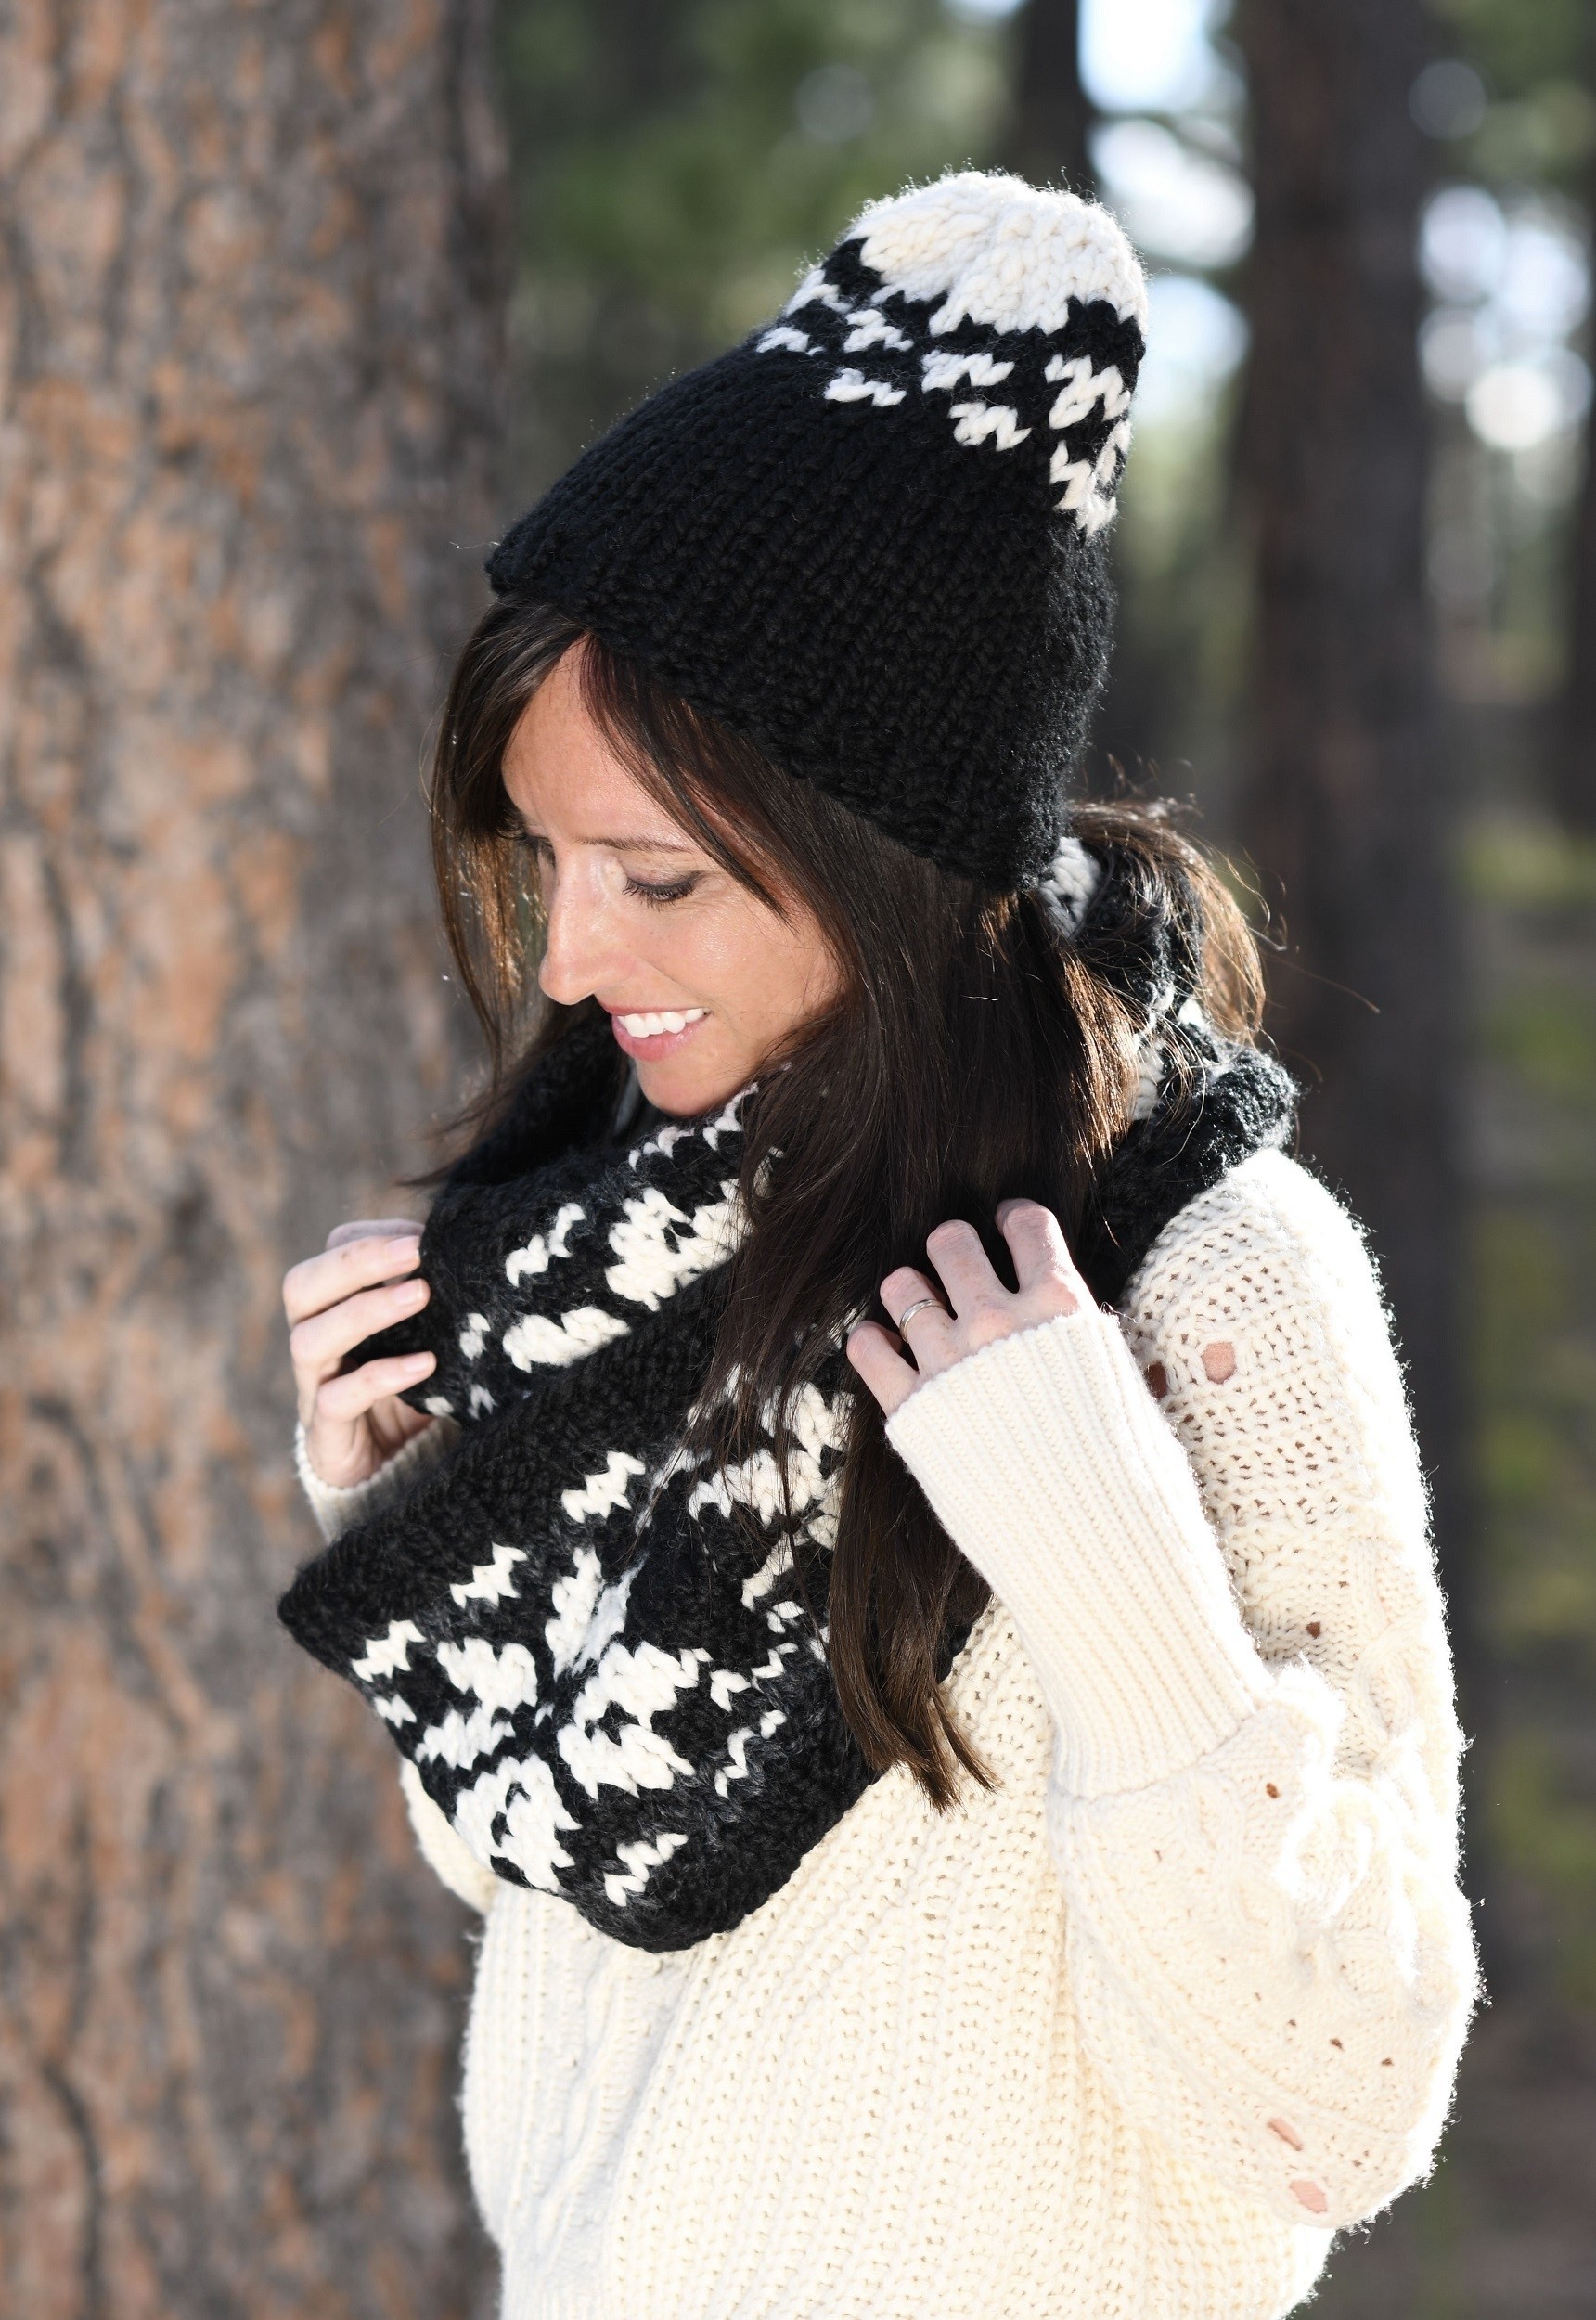 Woolly Winter Hat using Lion Brand Wool-Ease Thick & Quick Yarn - Crochet  Pattern & Tutorial 